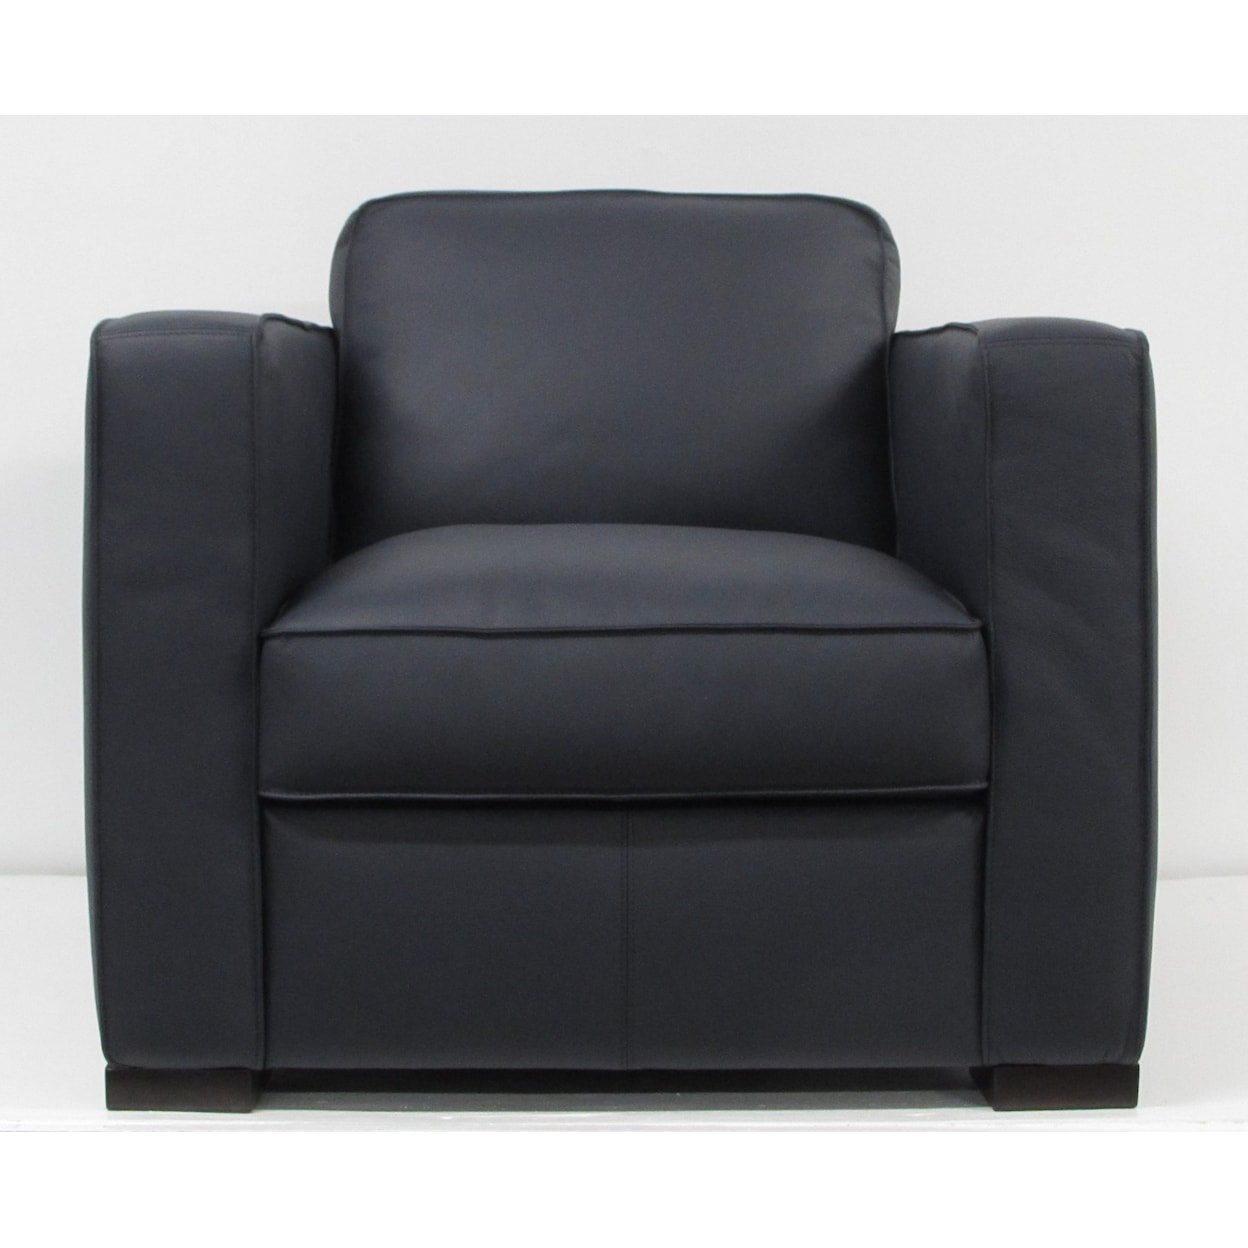 Natuzzi Editions C274 Leather Collection Navy Leather Chair